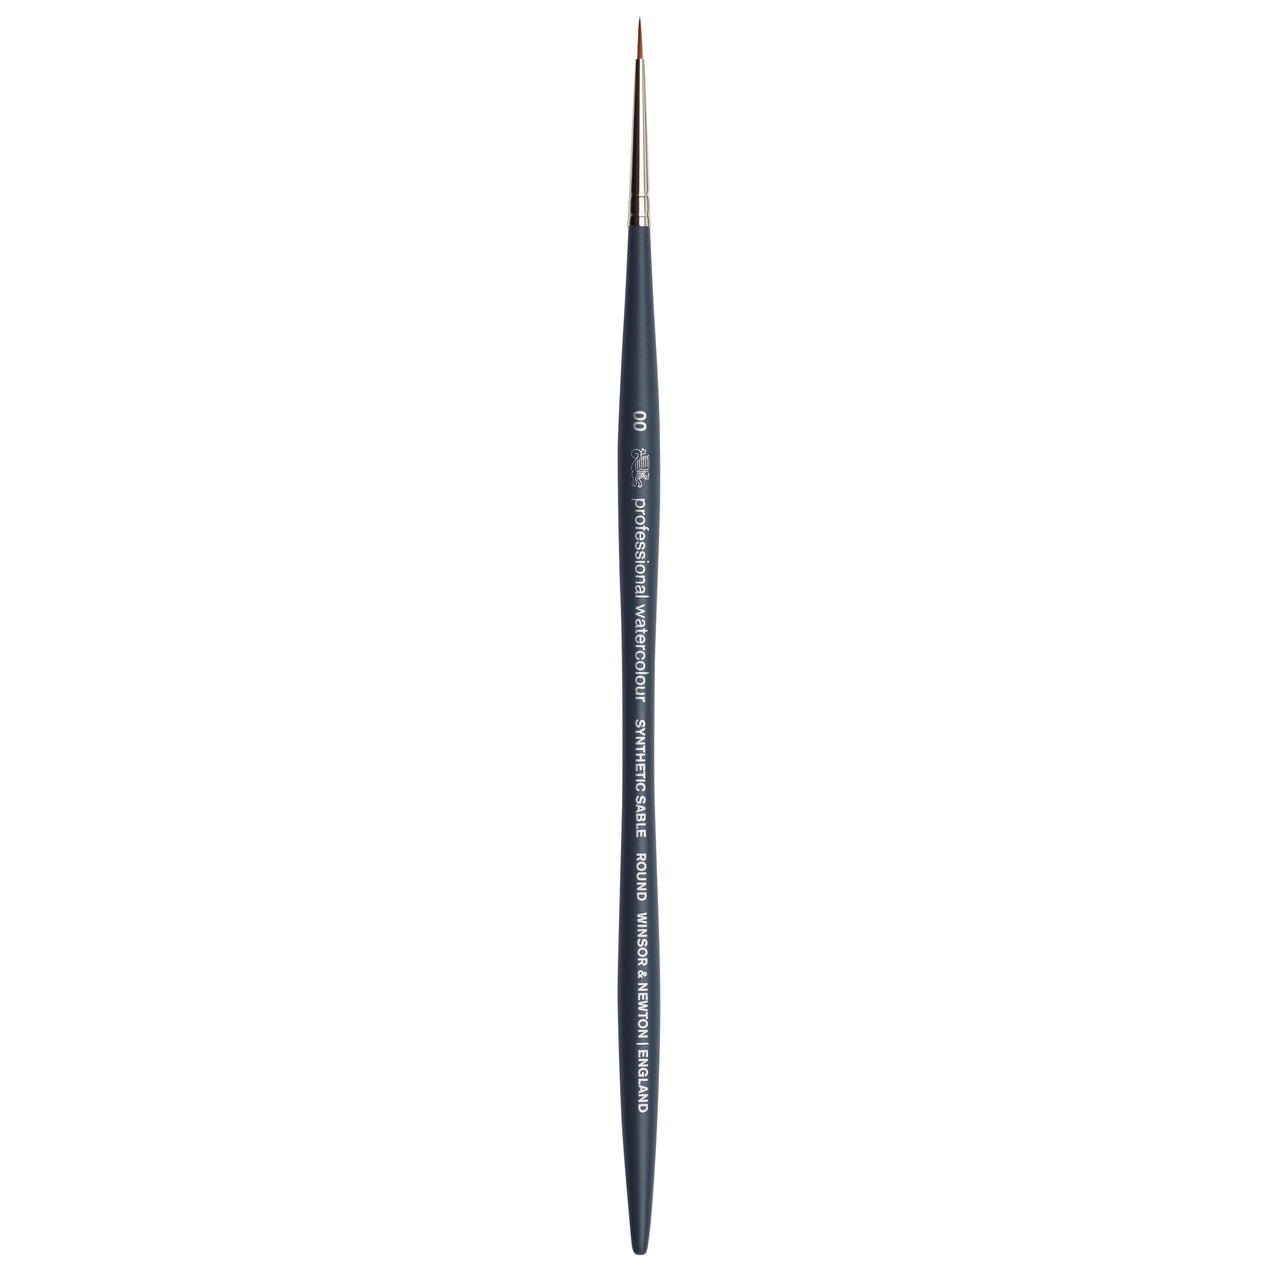 Winsor & Newton Professional Watercolor Synthetic Sable Brush - Round 00 - merriartist.com